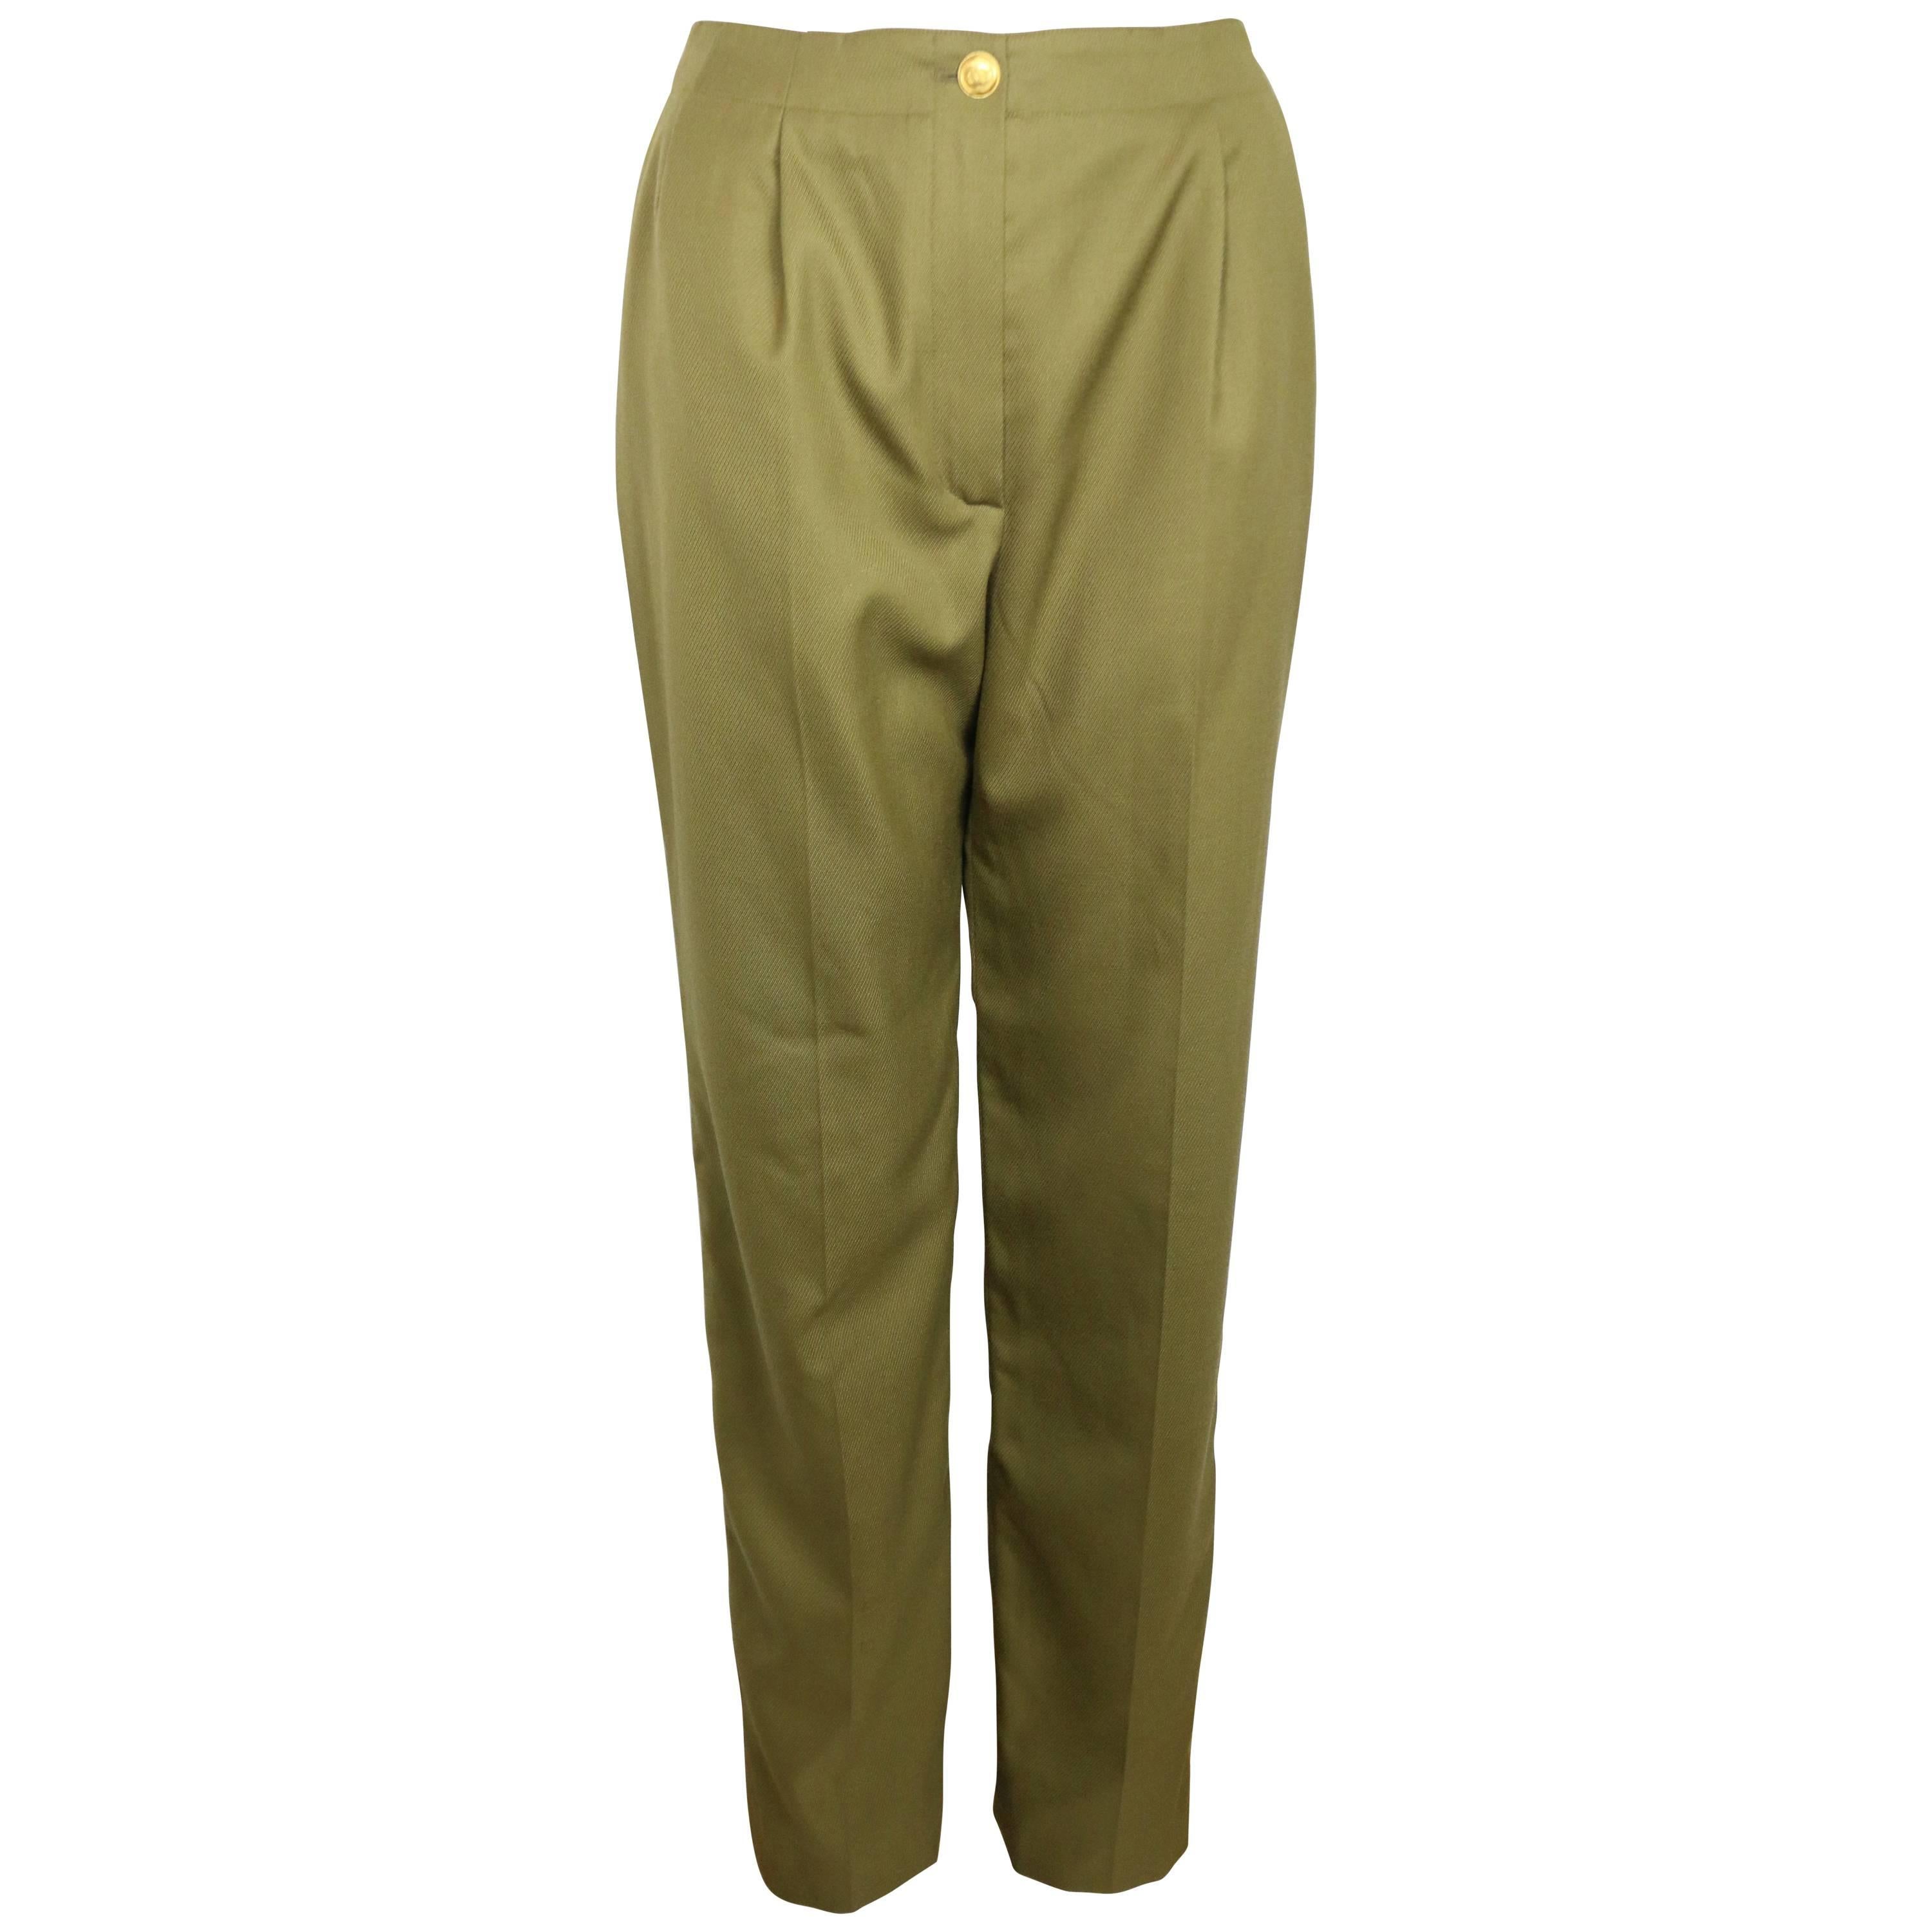 1996 A/W Chanel Army Green Wool Military Style Straight Leg Pants